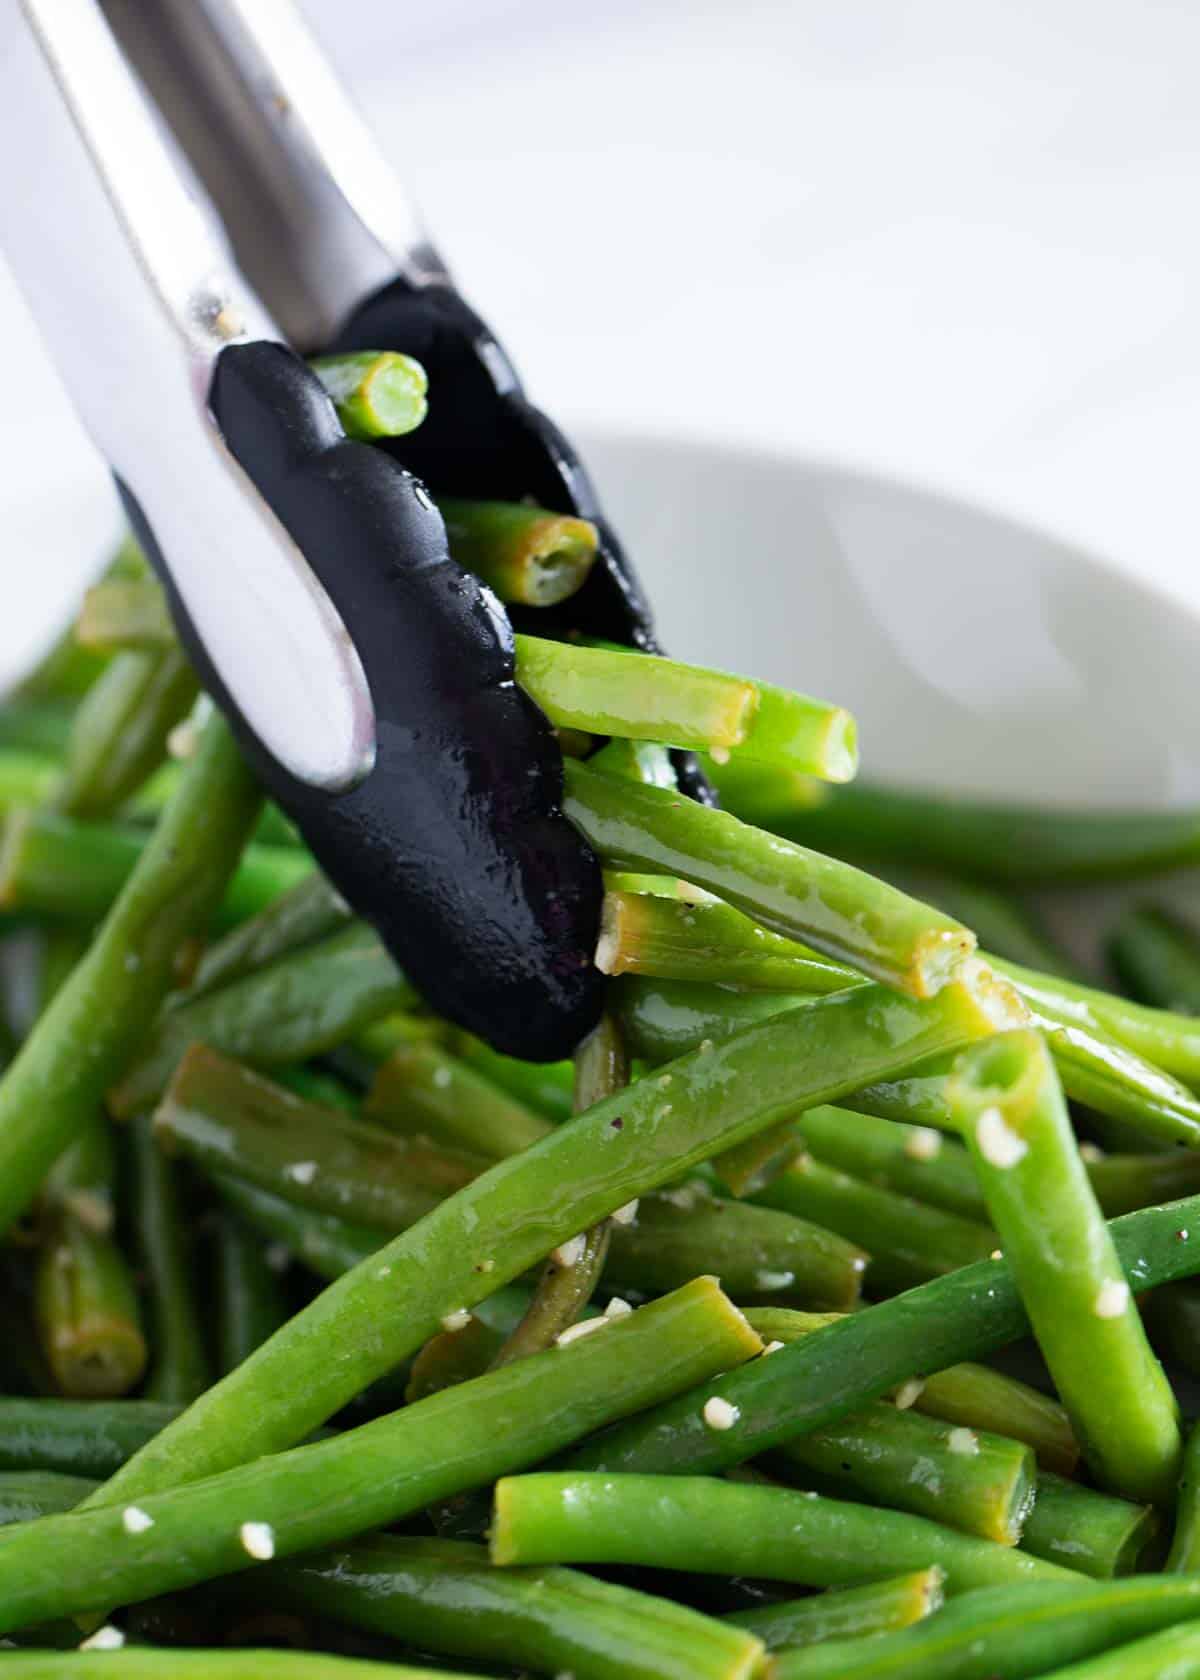 Tongs taking green beans out of bowl.